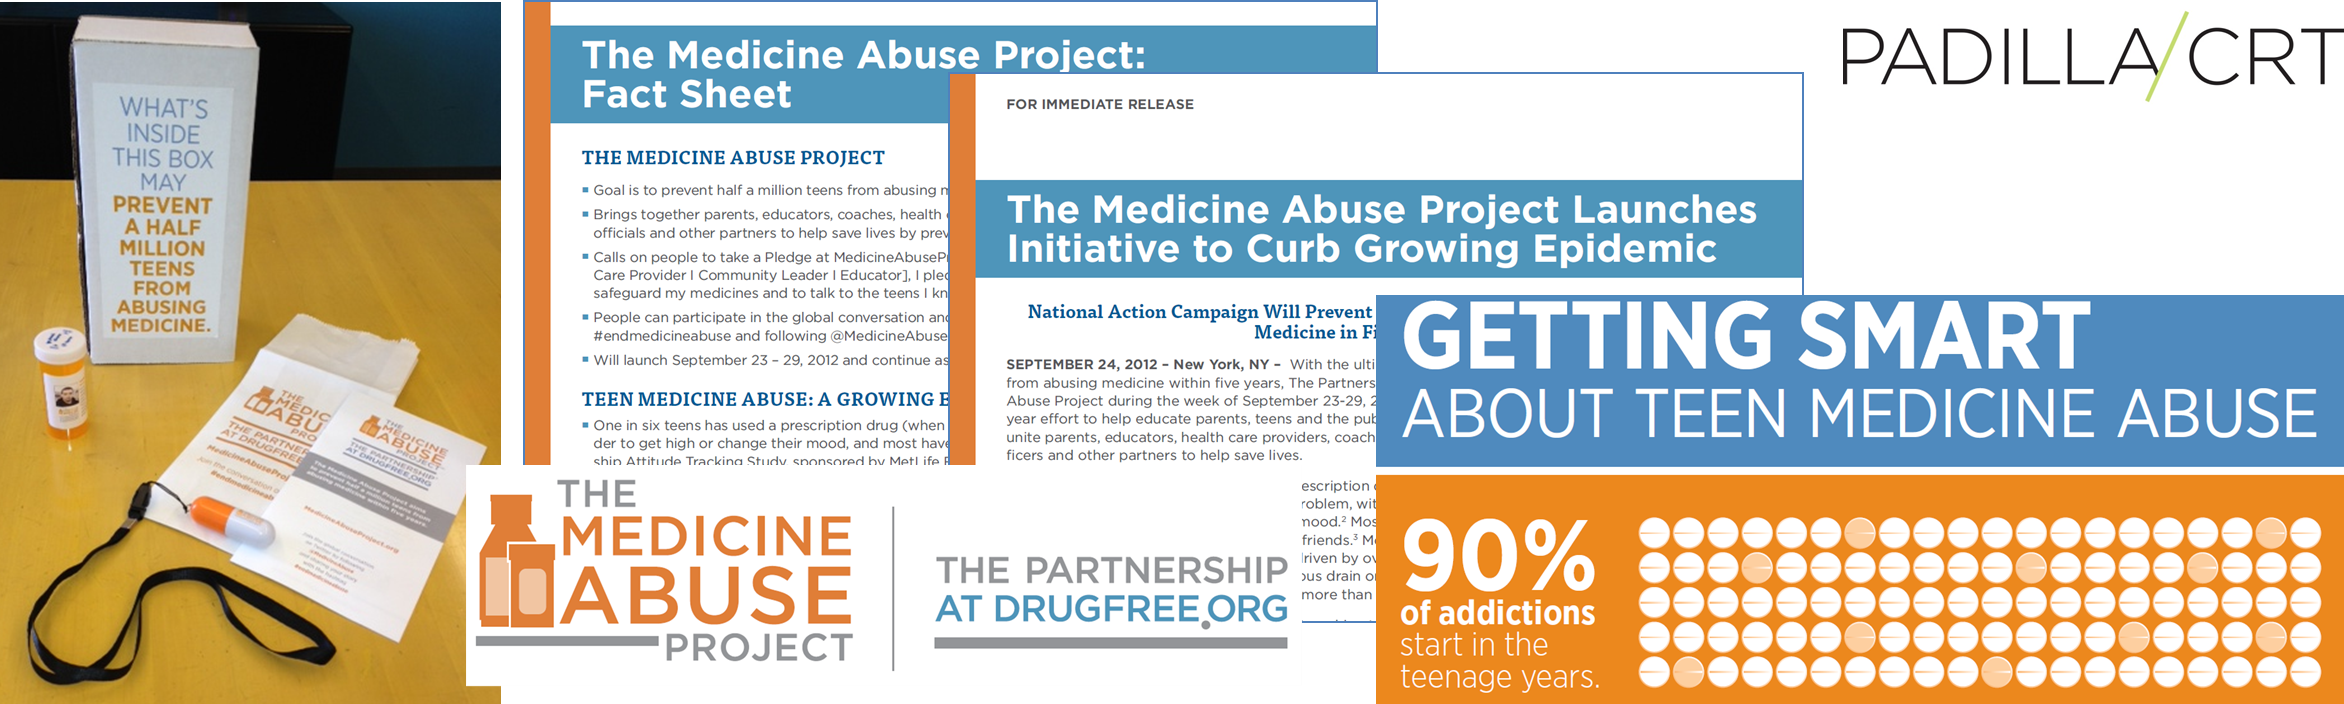 The Medicine Abuse Project: Preventing Half a Million Teens from Abusing Medicine by 2017 - Logo - https://s41078.pcdn.co/wp-content/uploads/2018/11/MAP-Banner.png